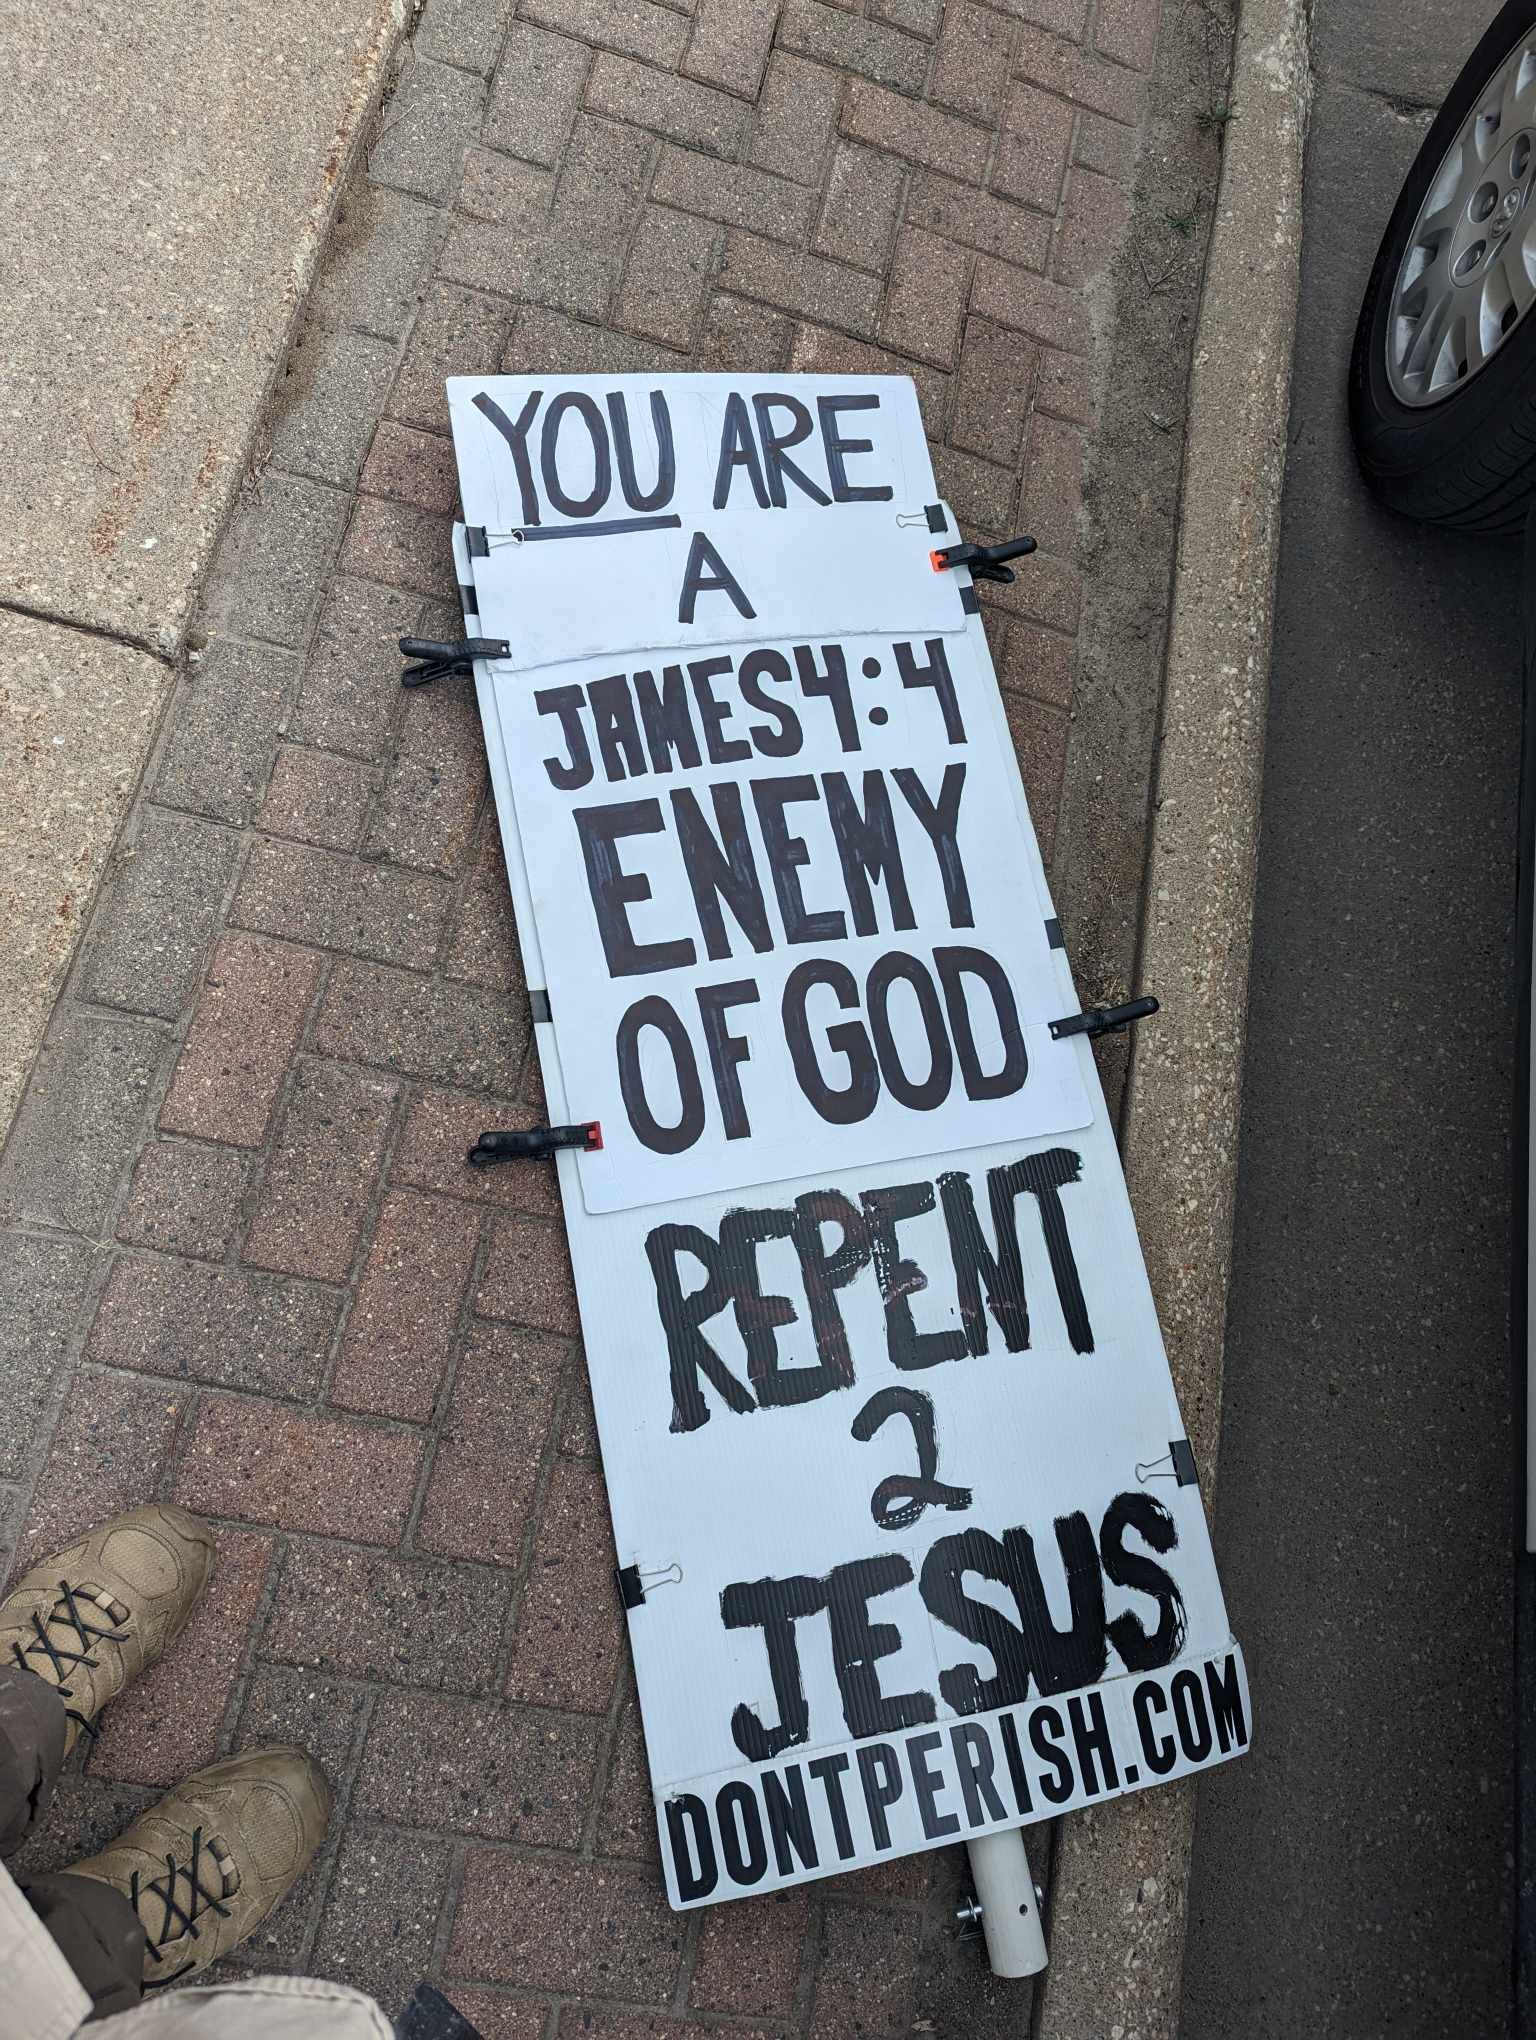 "You are a James 4:4 Enemy of God, Repent 2 Jesus" Gospel Sign